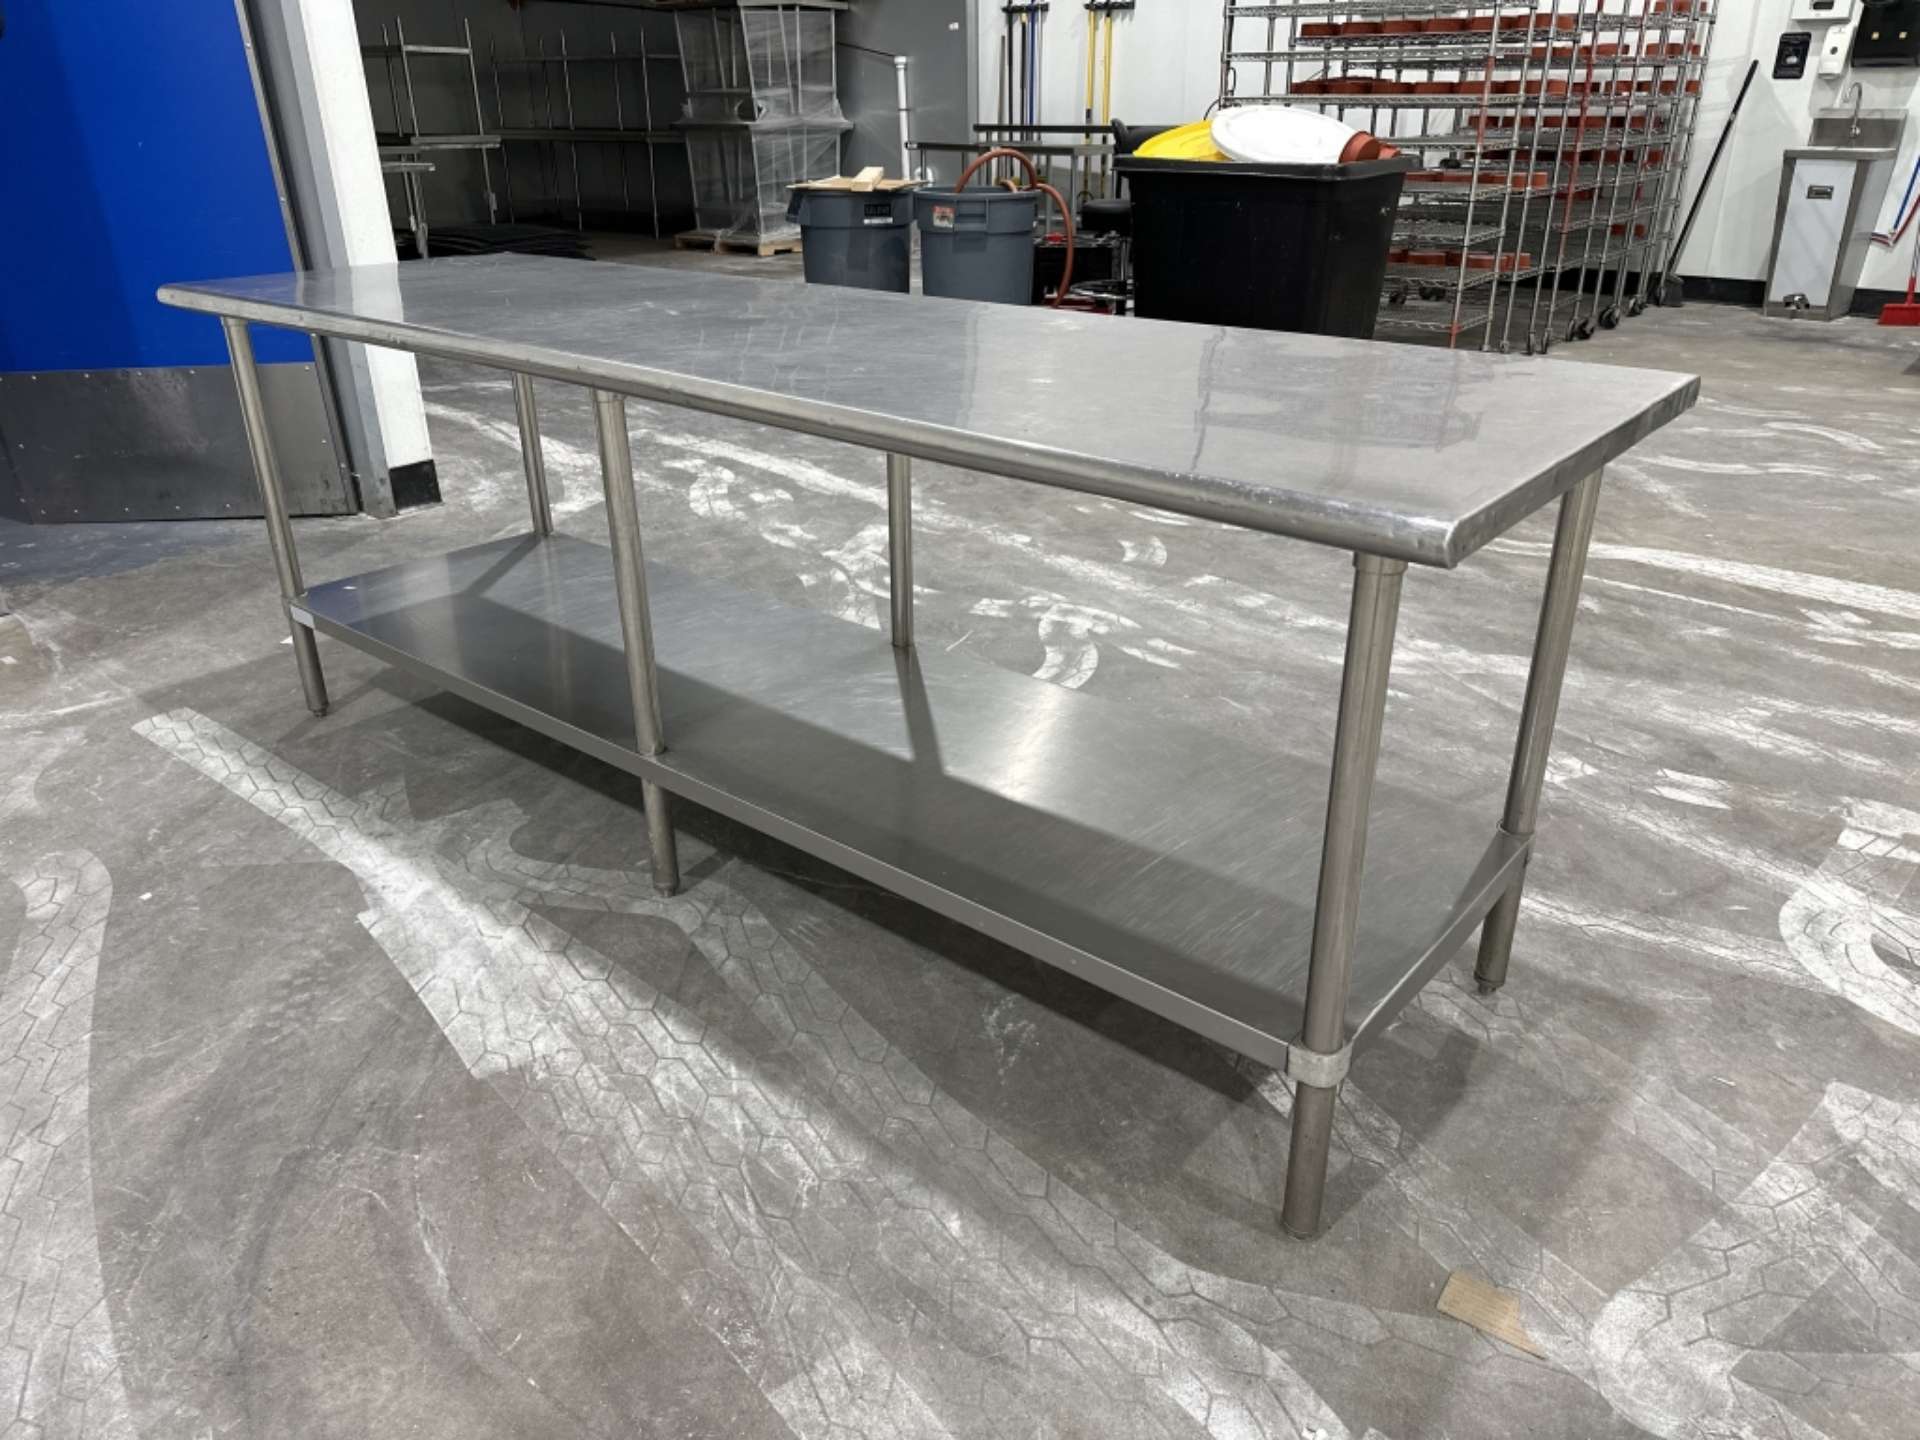 Stainless Steel Prep Table - 8ft x 2.5ft - Image 2 of 2